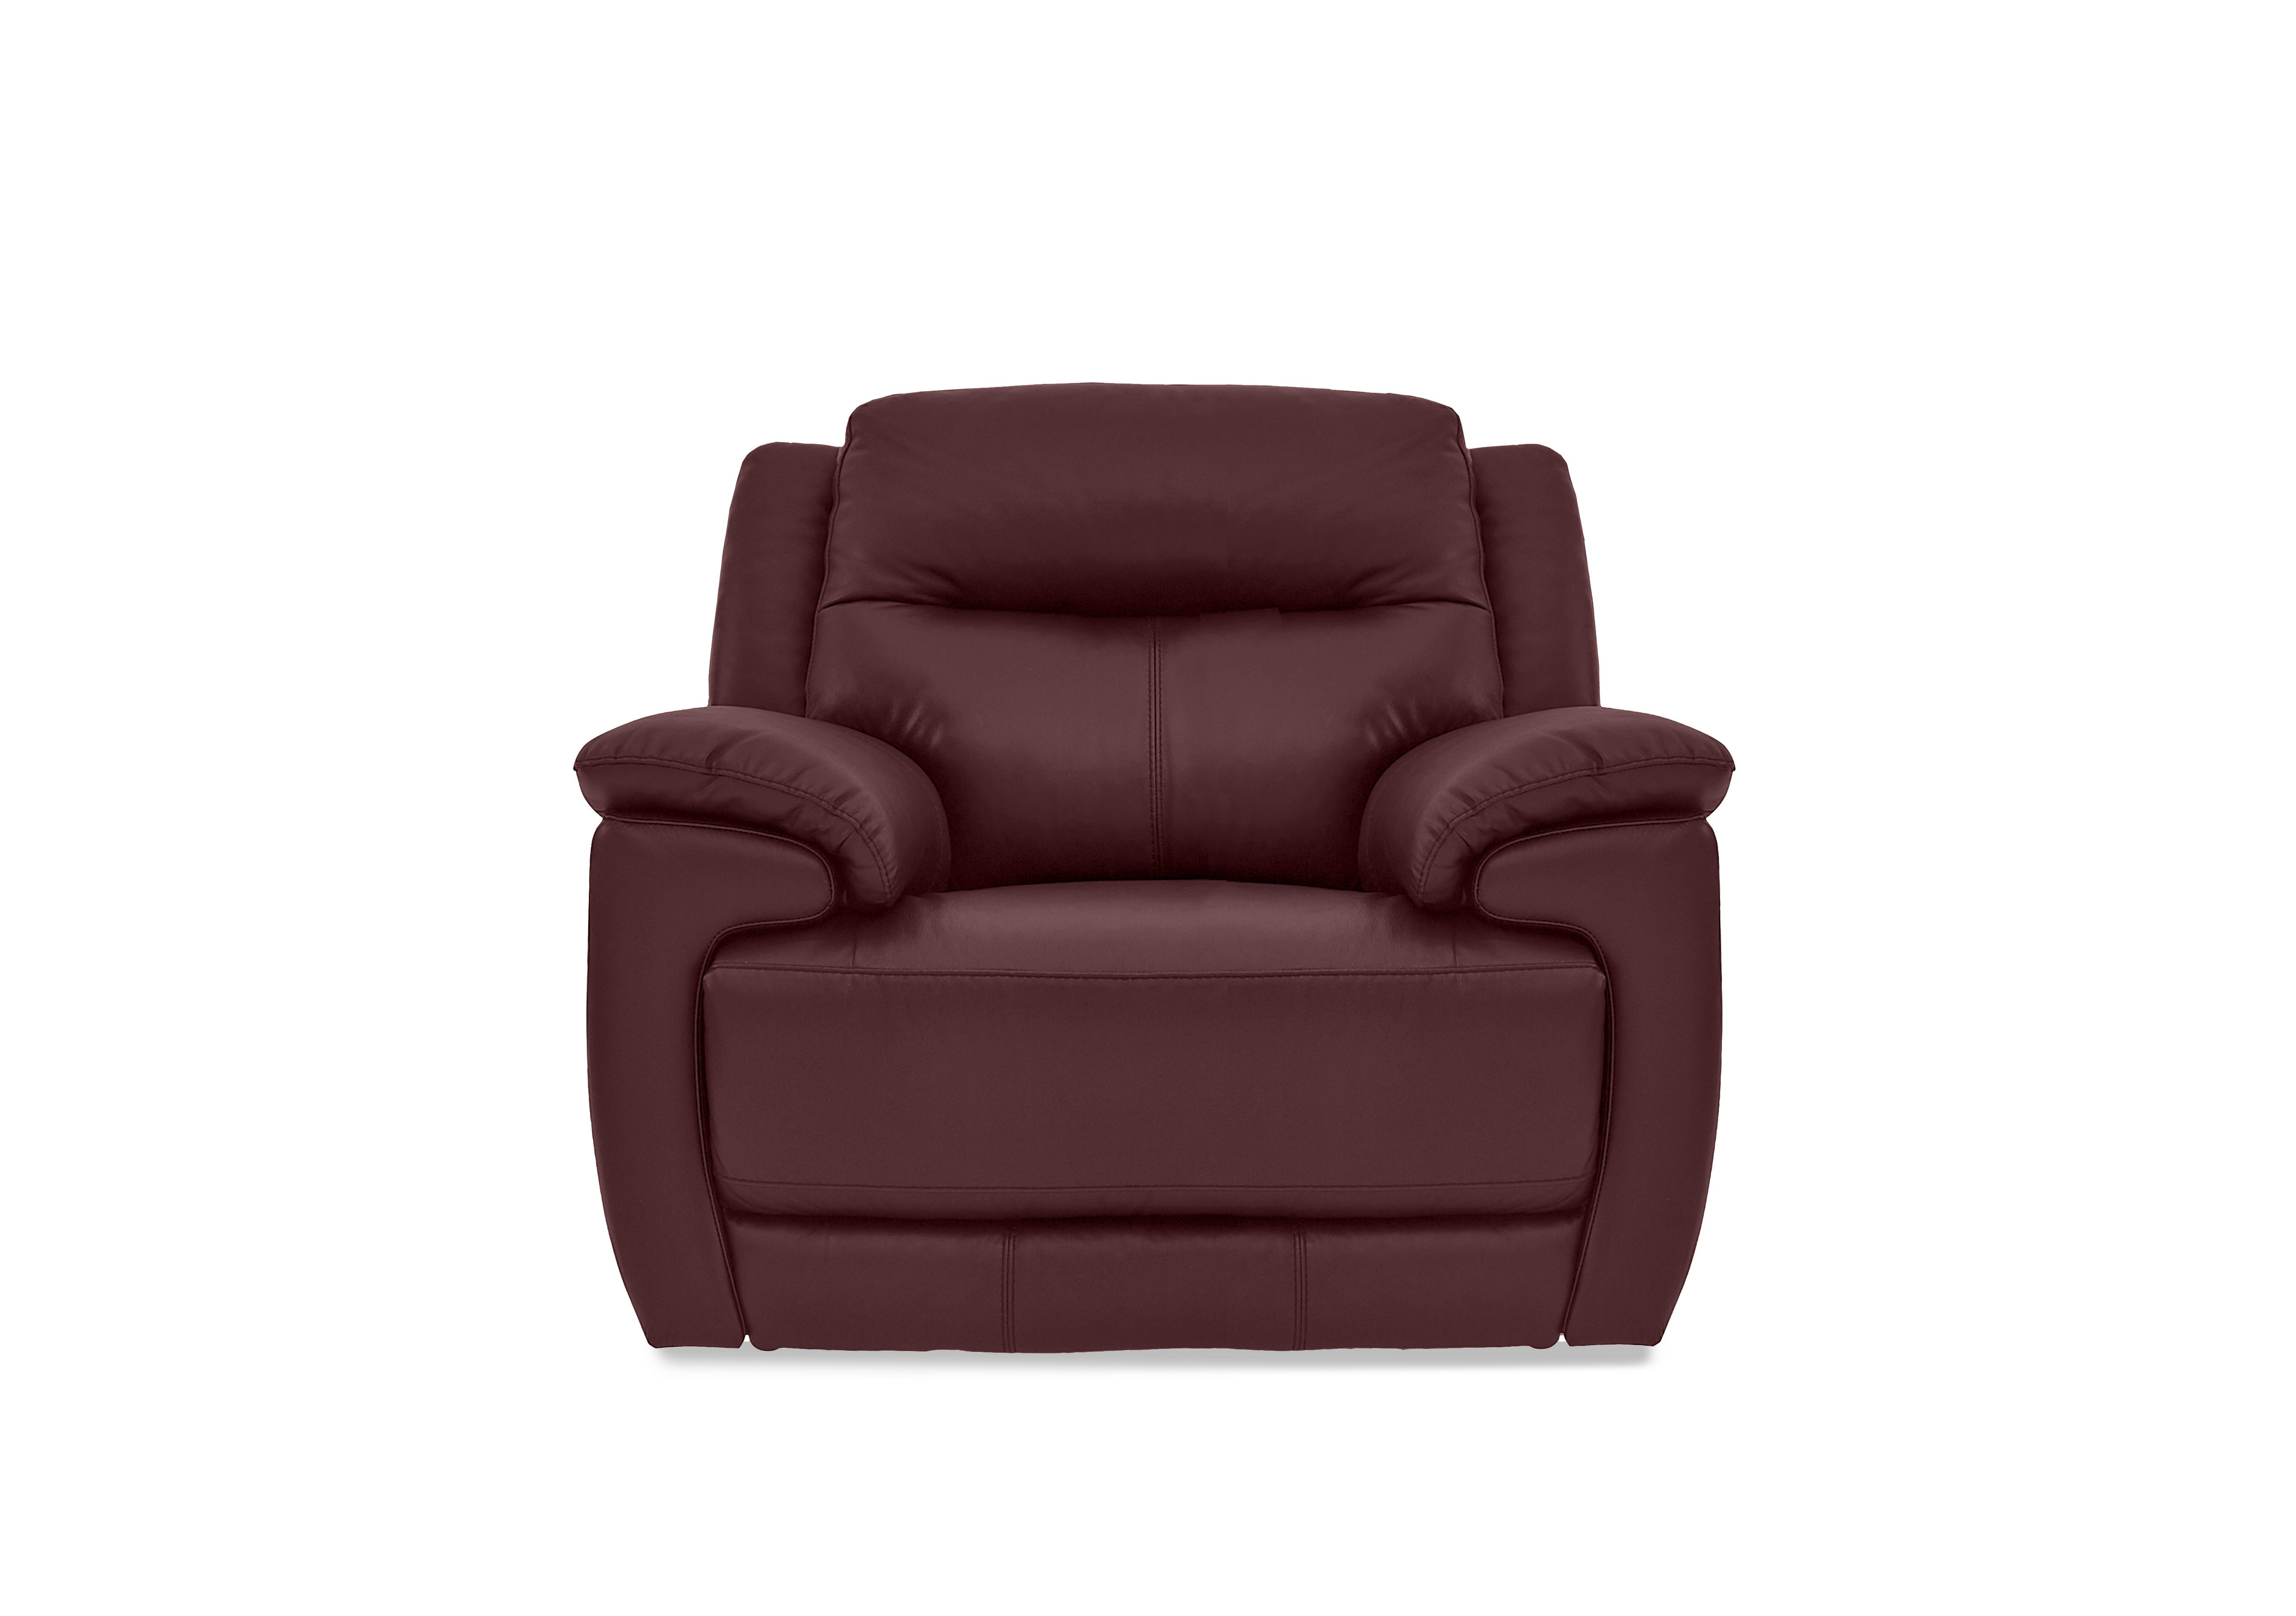 Touch Leather Armchair in Bv-035c Deep Red on Furniture Village